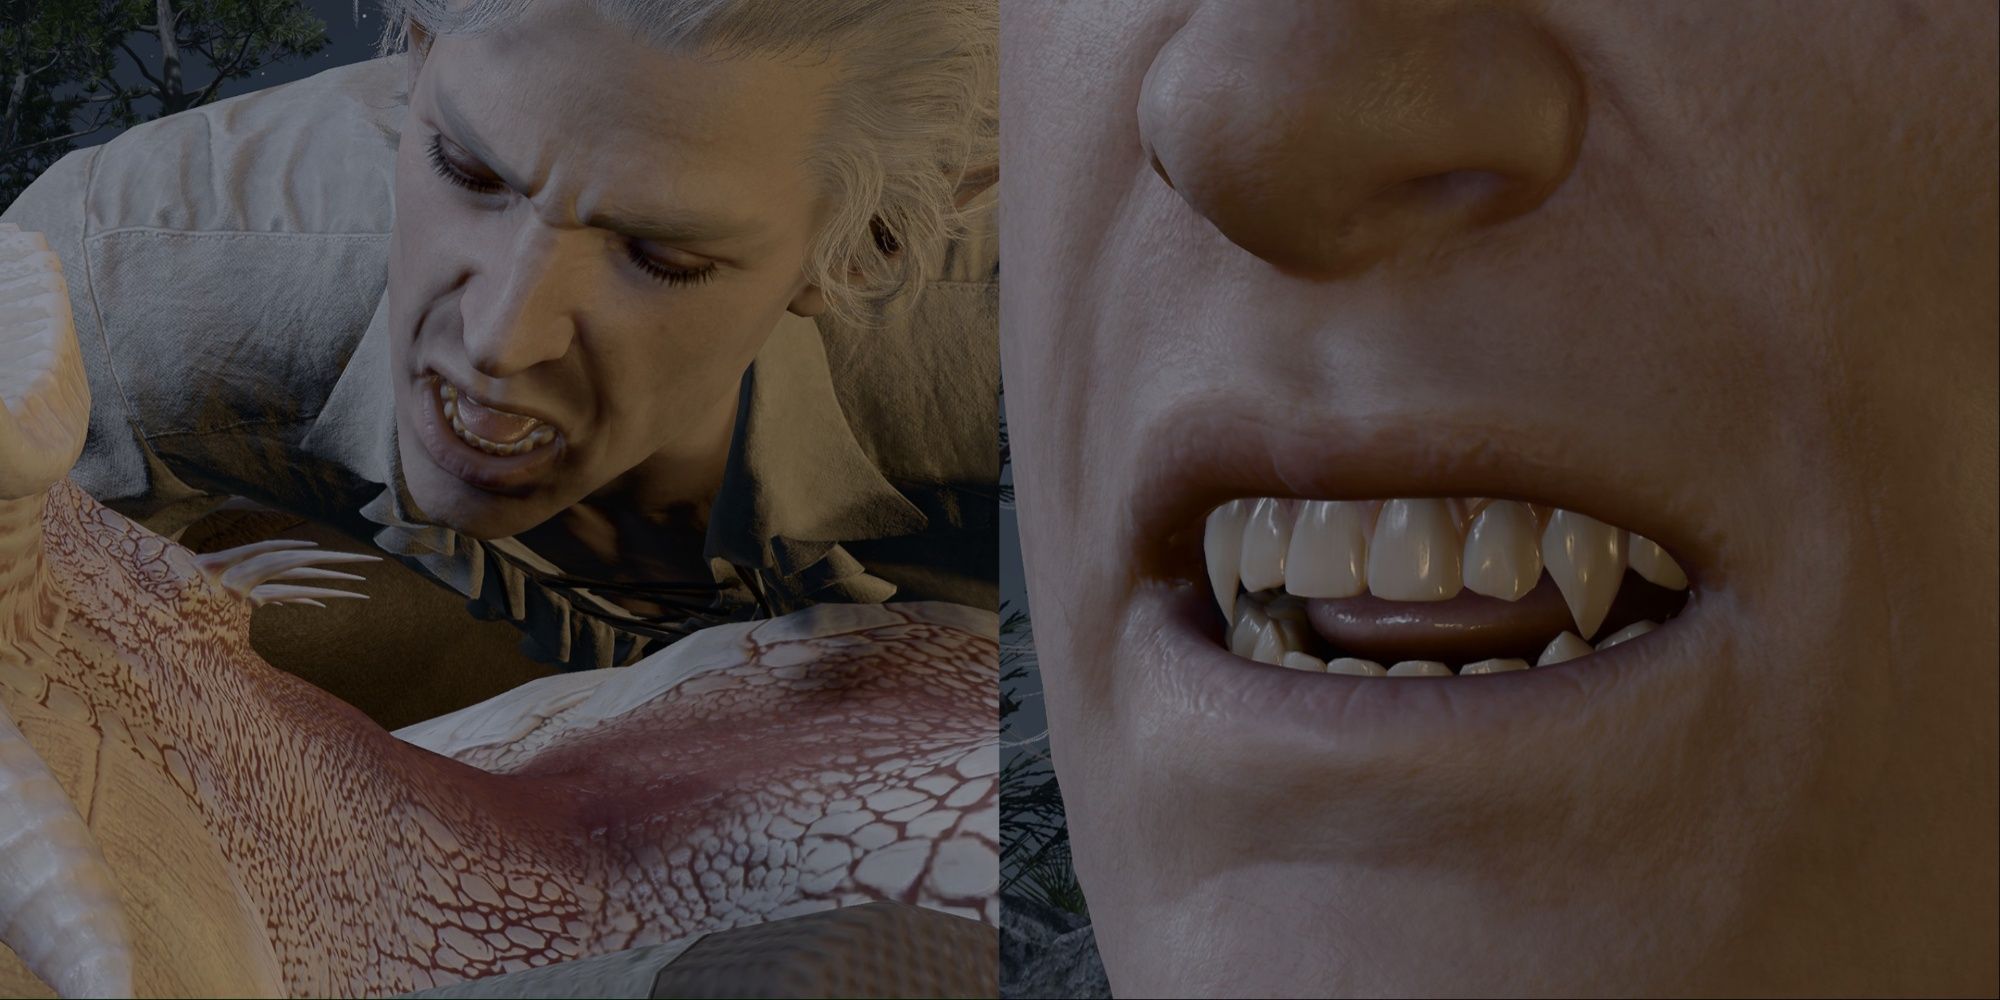 A split image of Astarion ready to bite player character at camp and Astarion's fangs in Baldur's Gate 3.